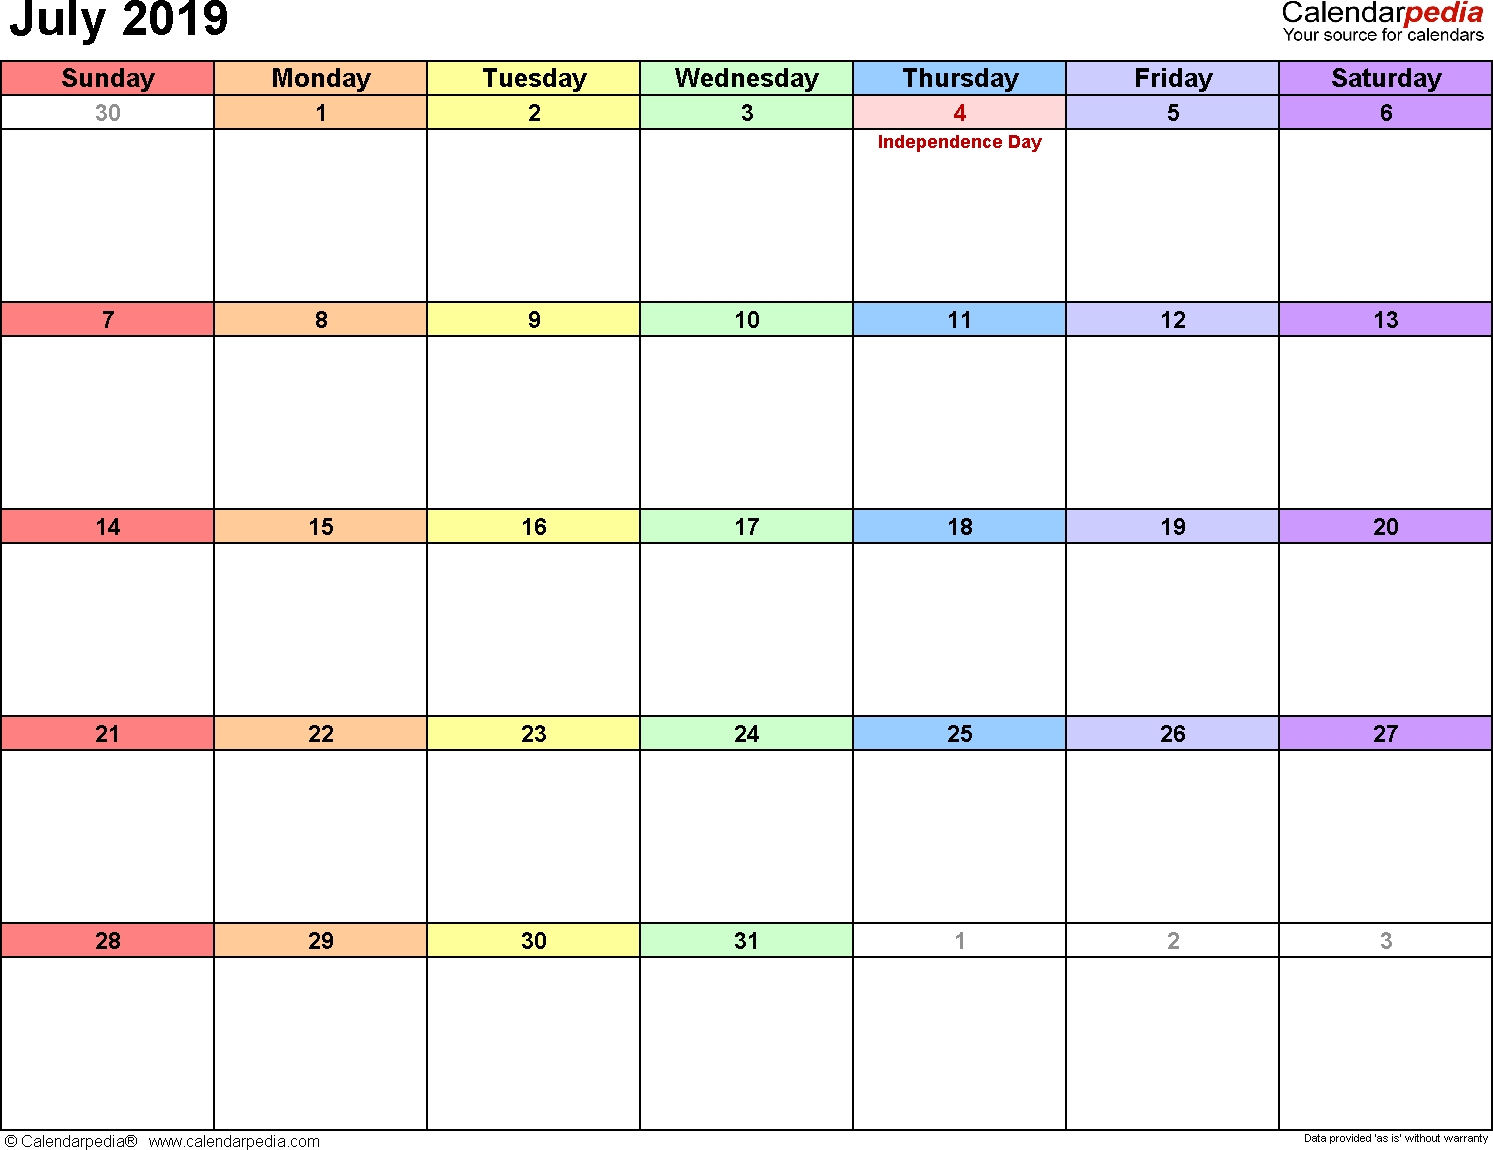 July 2019 - Calendar Templates For Word, Excel And Pdf Exceptional Free Printablle Calendarwith Us Holidays And 1 Omth Preceding And 1 Following